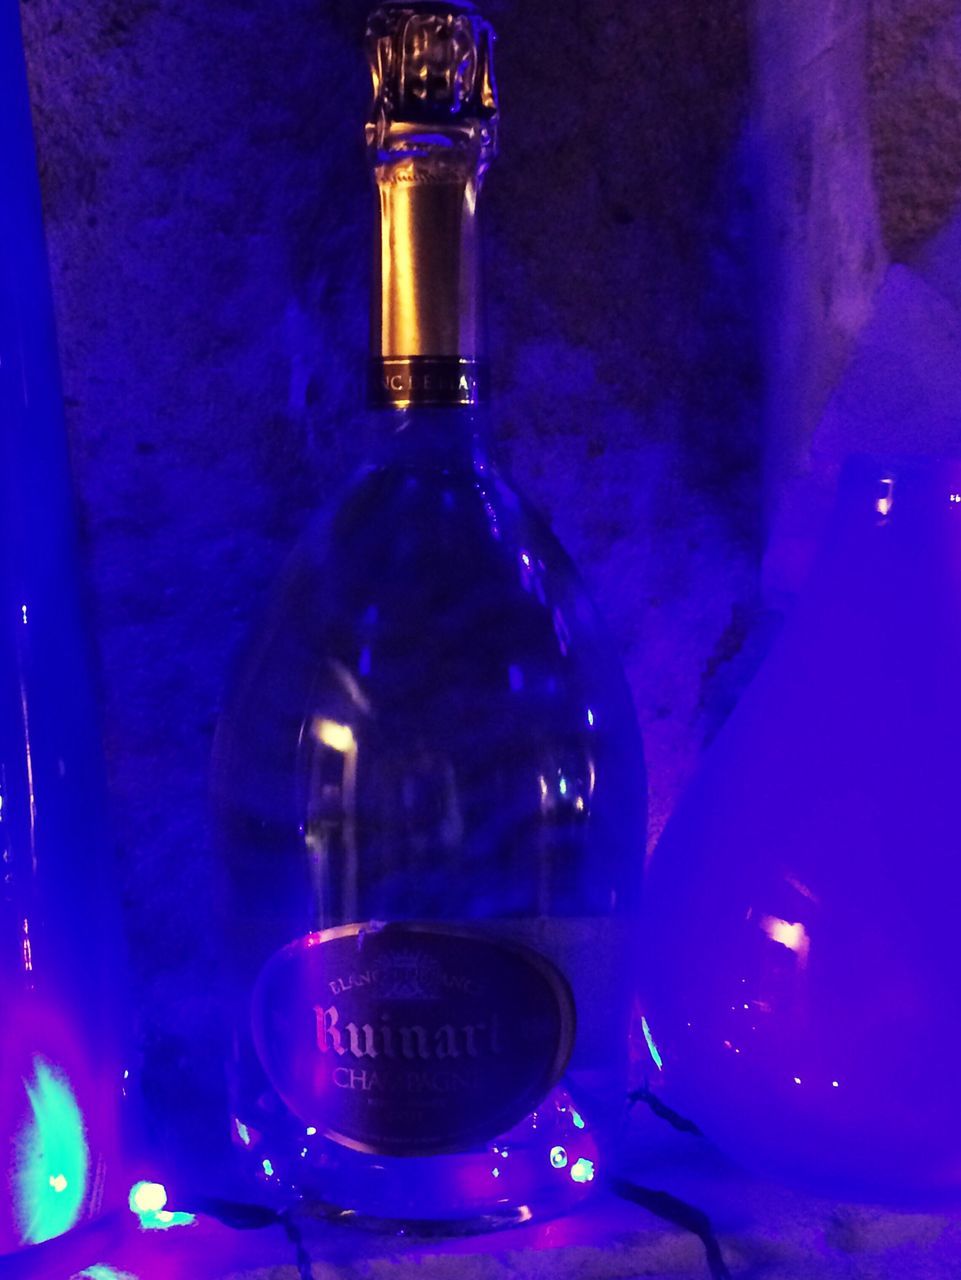 bottle, indoors, blue, illuminated, alcohol, no people, close-up, drink, drinking glass, night